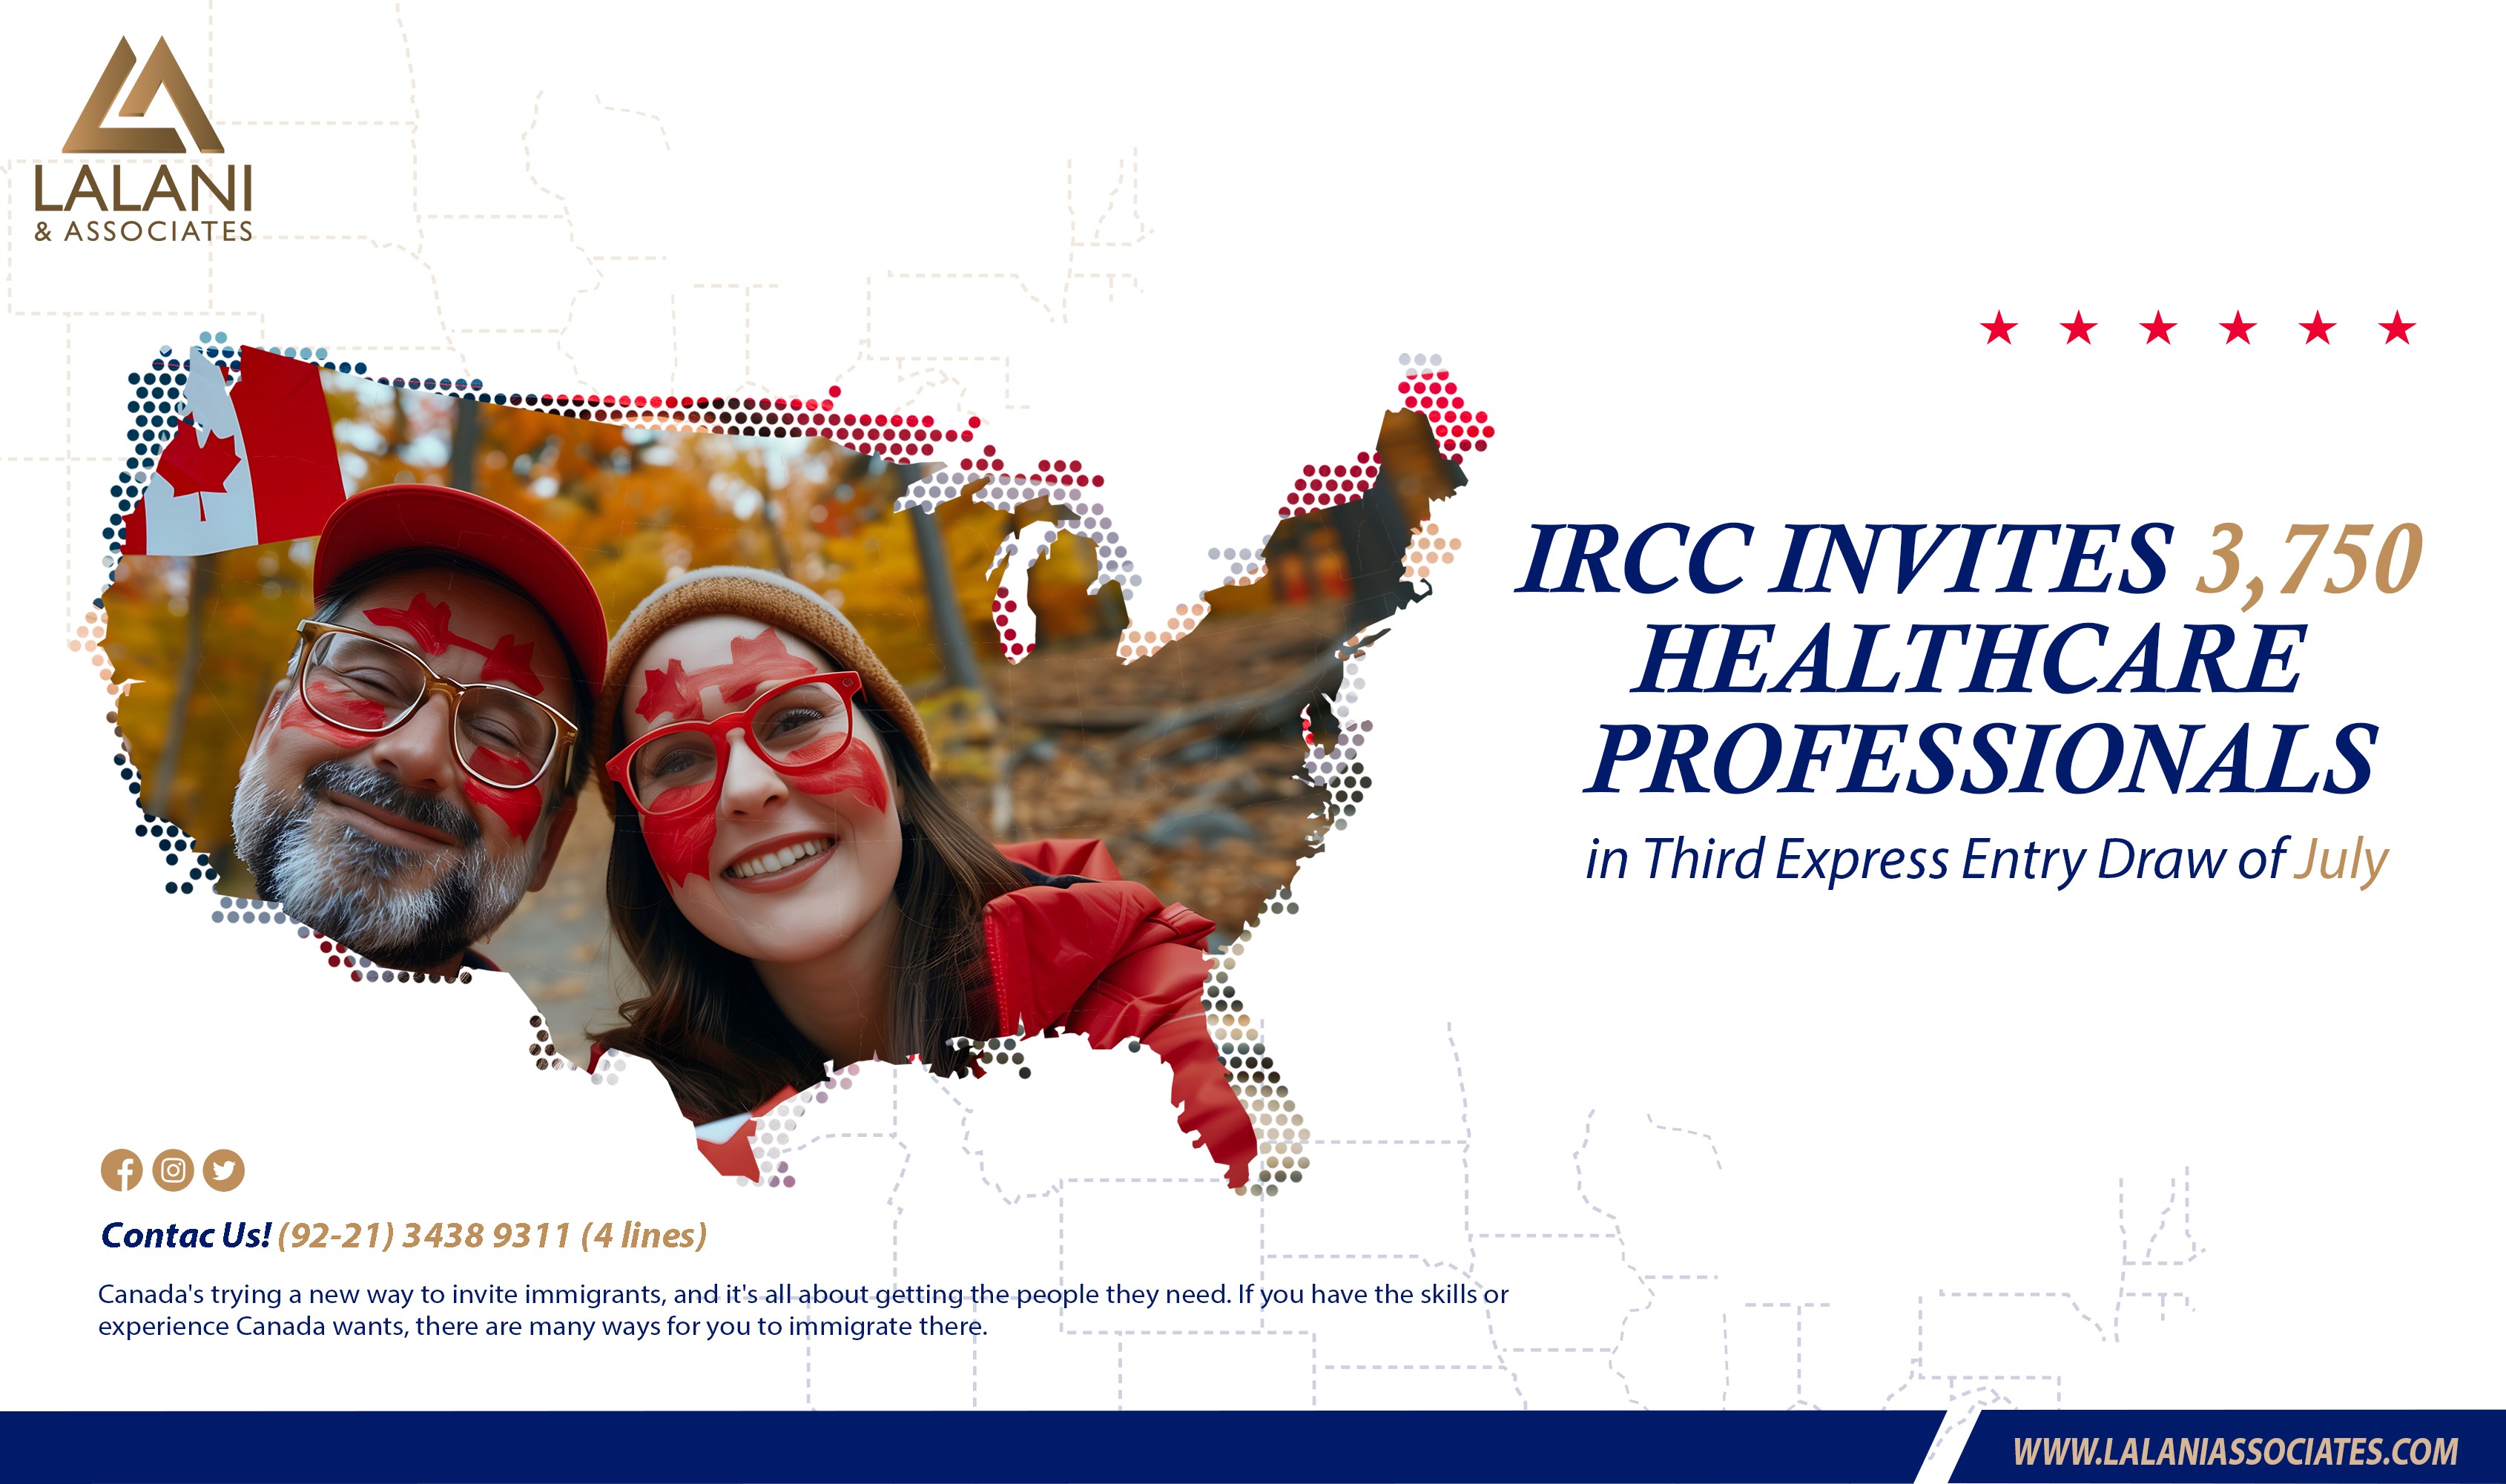 IRCC Invites 3,750 Healthcare Professionals in Third Express Entry Draw of July